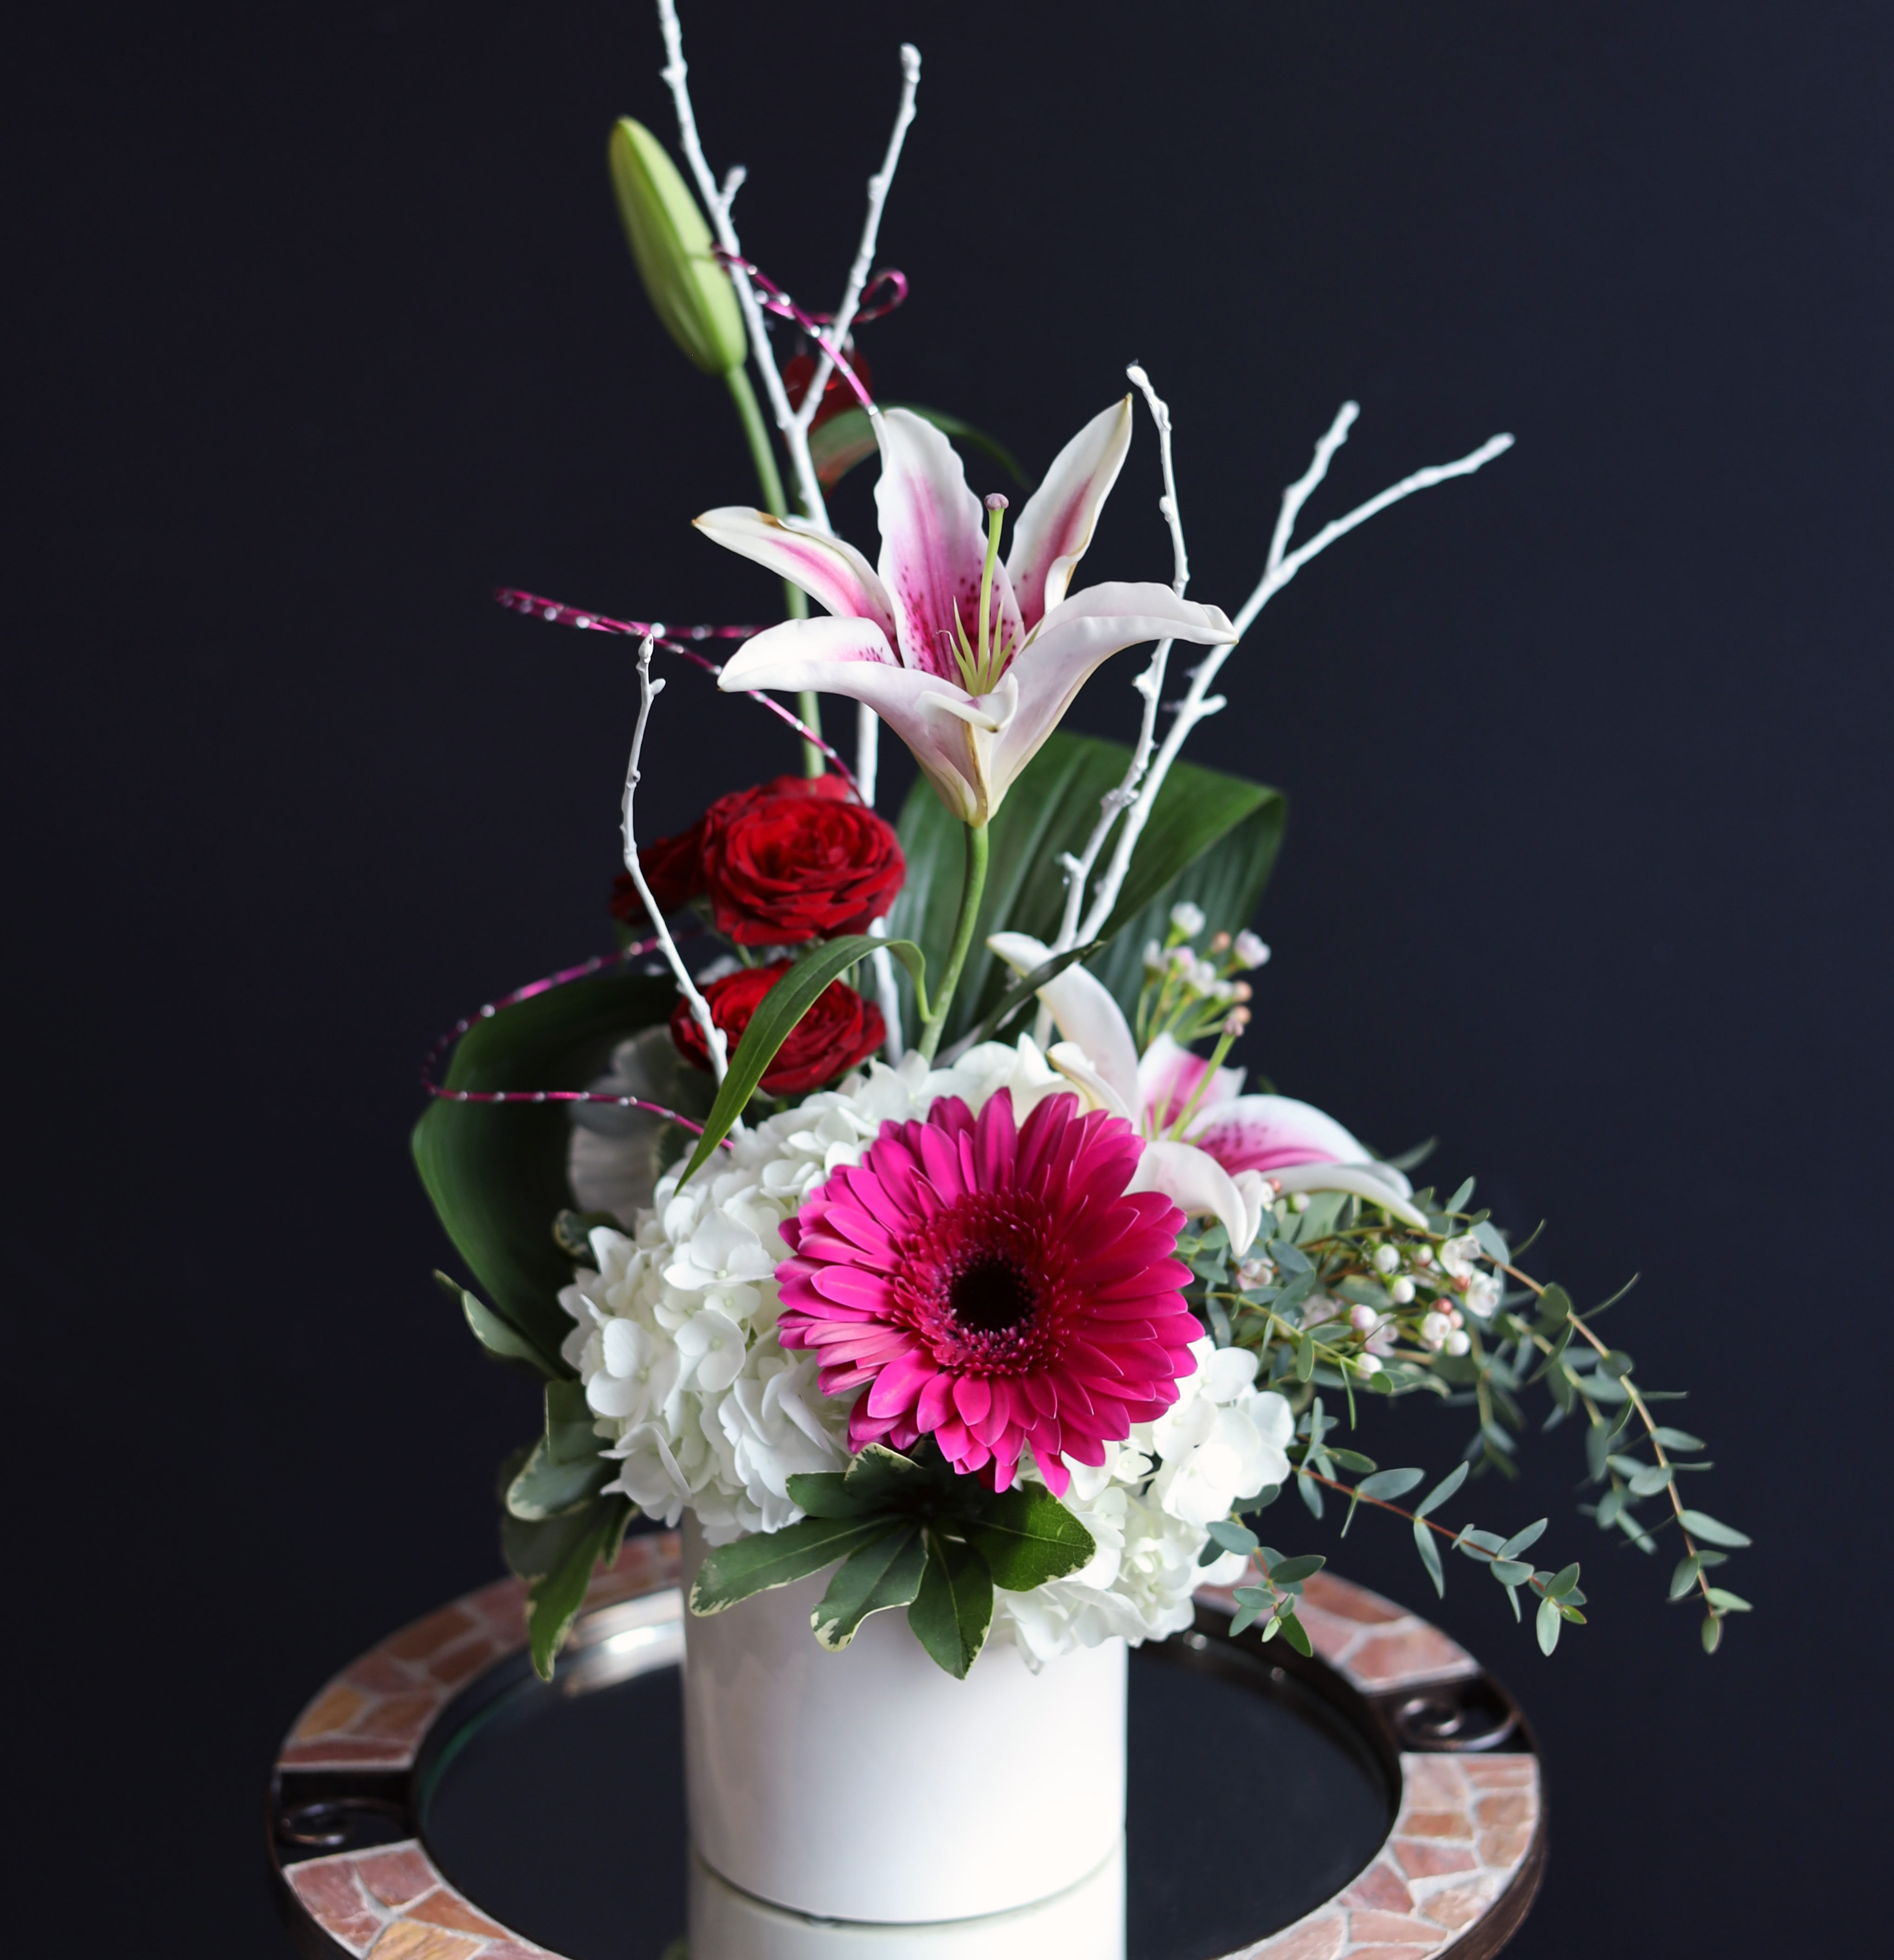 Divine - Starfighter Lily, Gerbera Daisy, Hydrangea, Spray Roses, and more varieties of floral stems designed together for an artistically divine look!